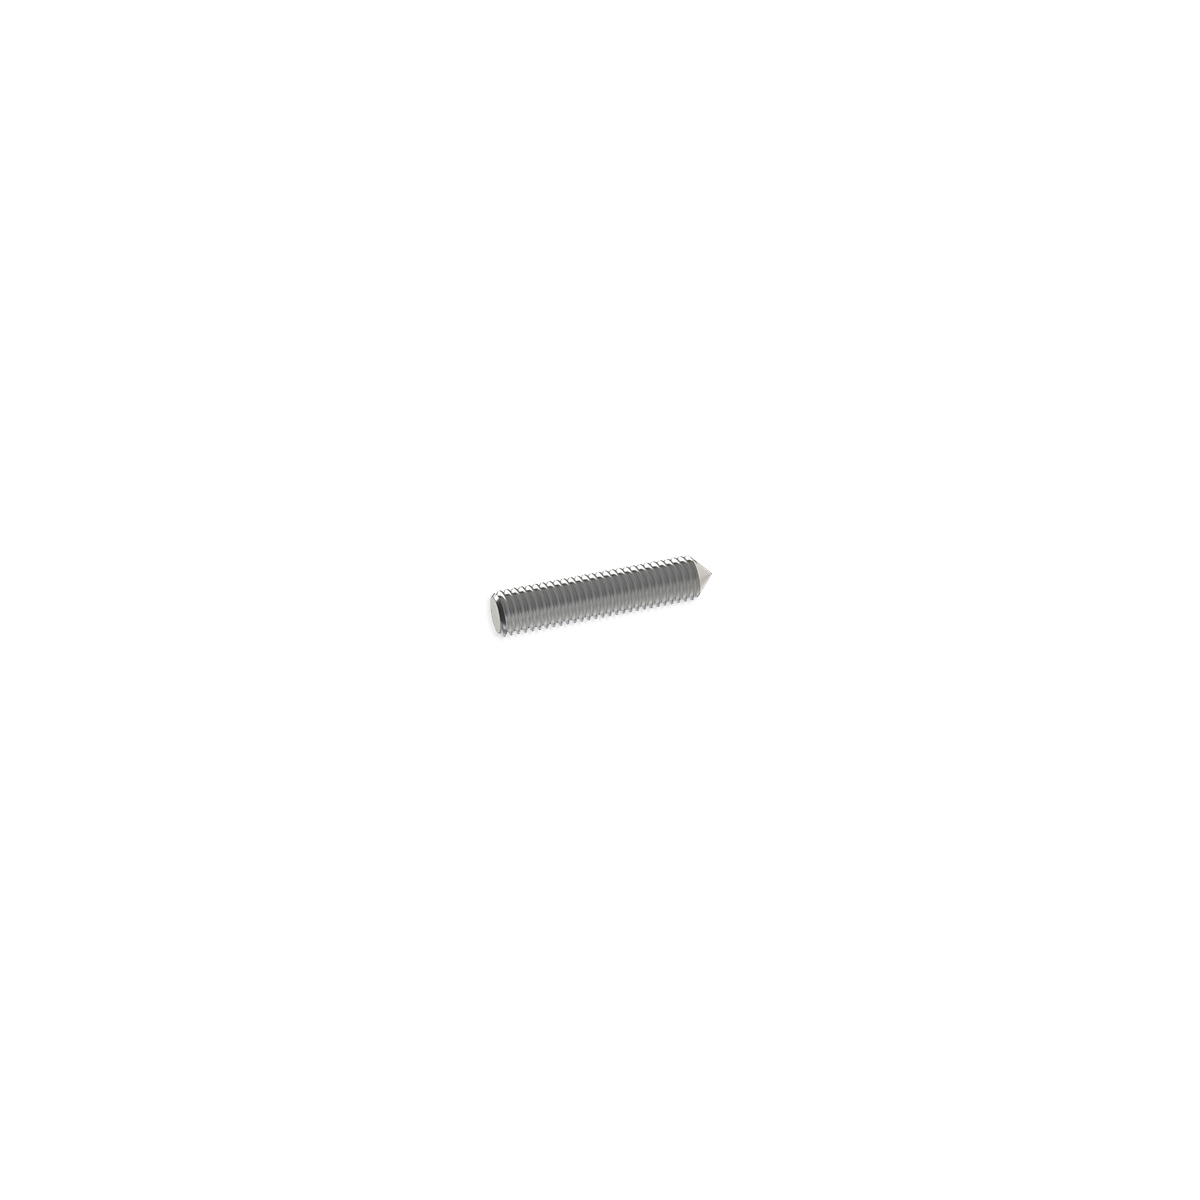 5/16'' Diameter X 1'' Long, Stainless Steel 5/16-18 Threaded Stud (1 End Flat - 1 End Conical)